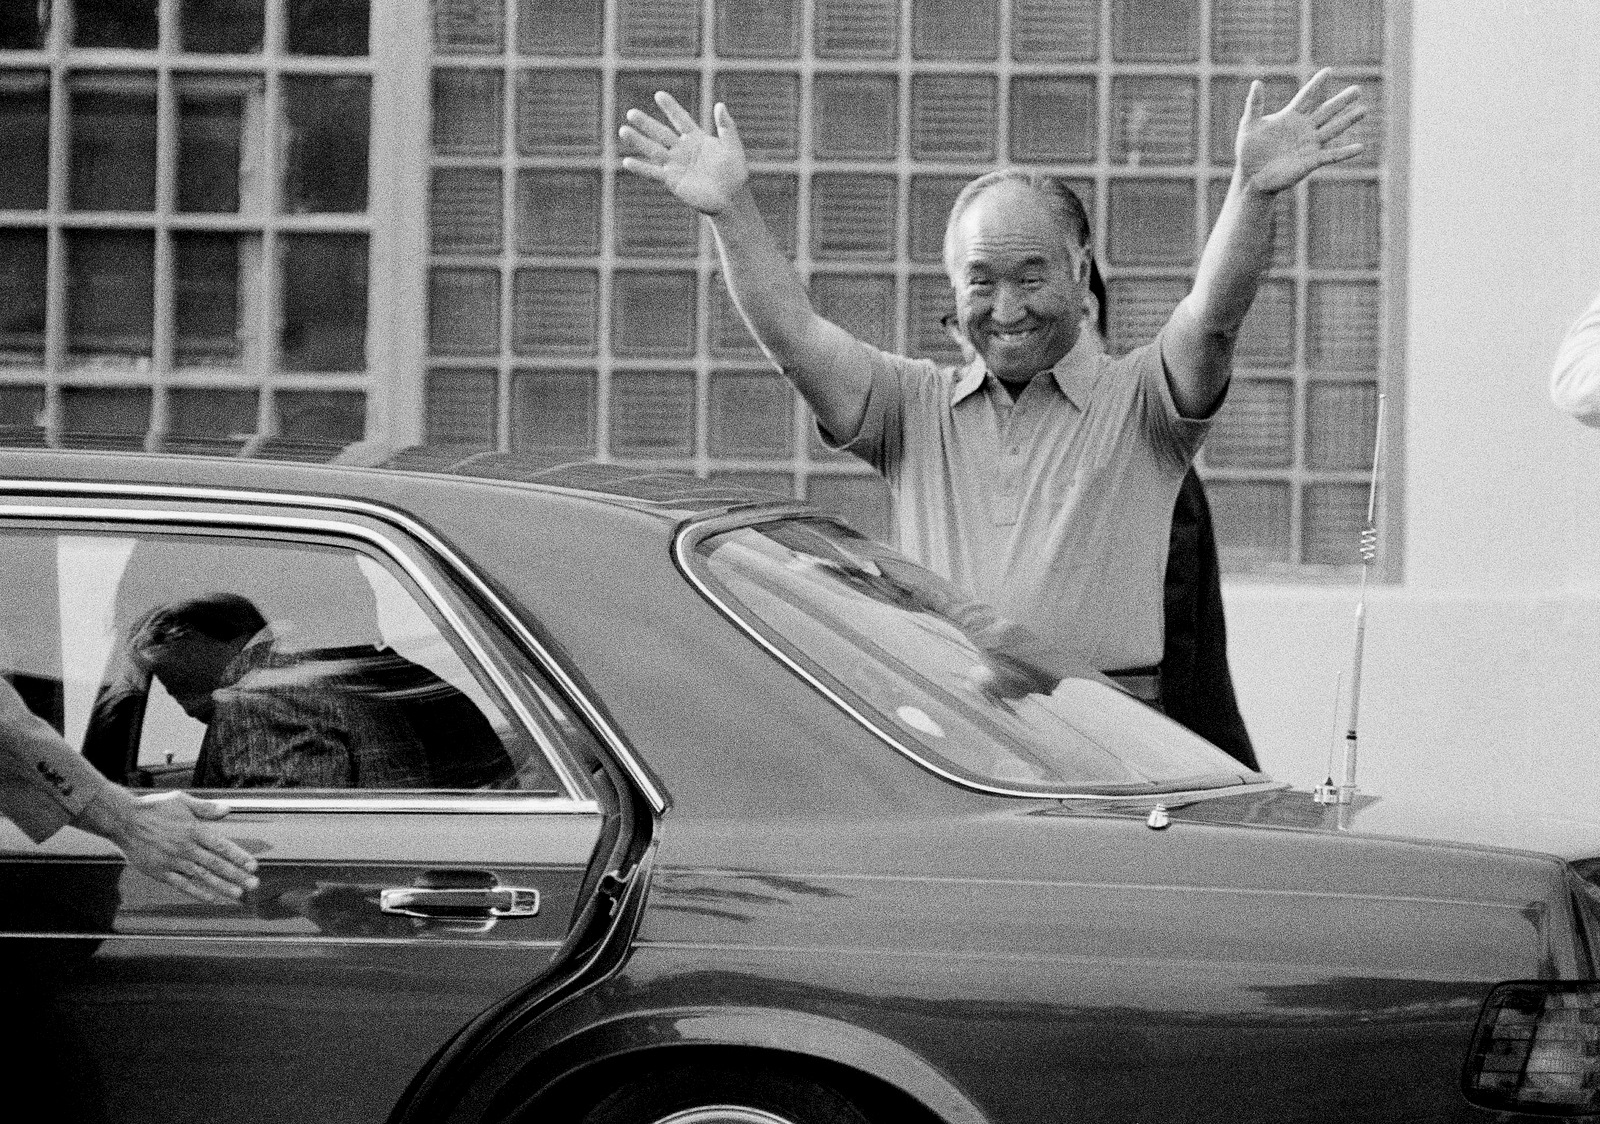 Rev. Sun Myung Moon smiles and waves as he left the Federal Correctional Institution in Danbury, July 4, 1985. Moon, who heads the Unification Church, was jailed last July on tax evasion charges. He left Danbury to serve the remainder of his sentence at a halfway house in Brooklyn, N.Y. (AP/Bob Child)